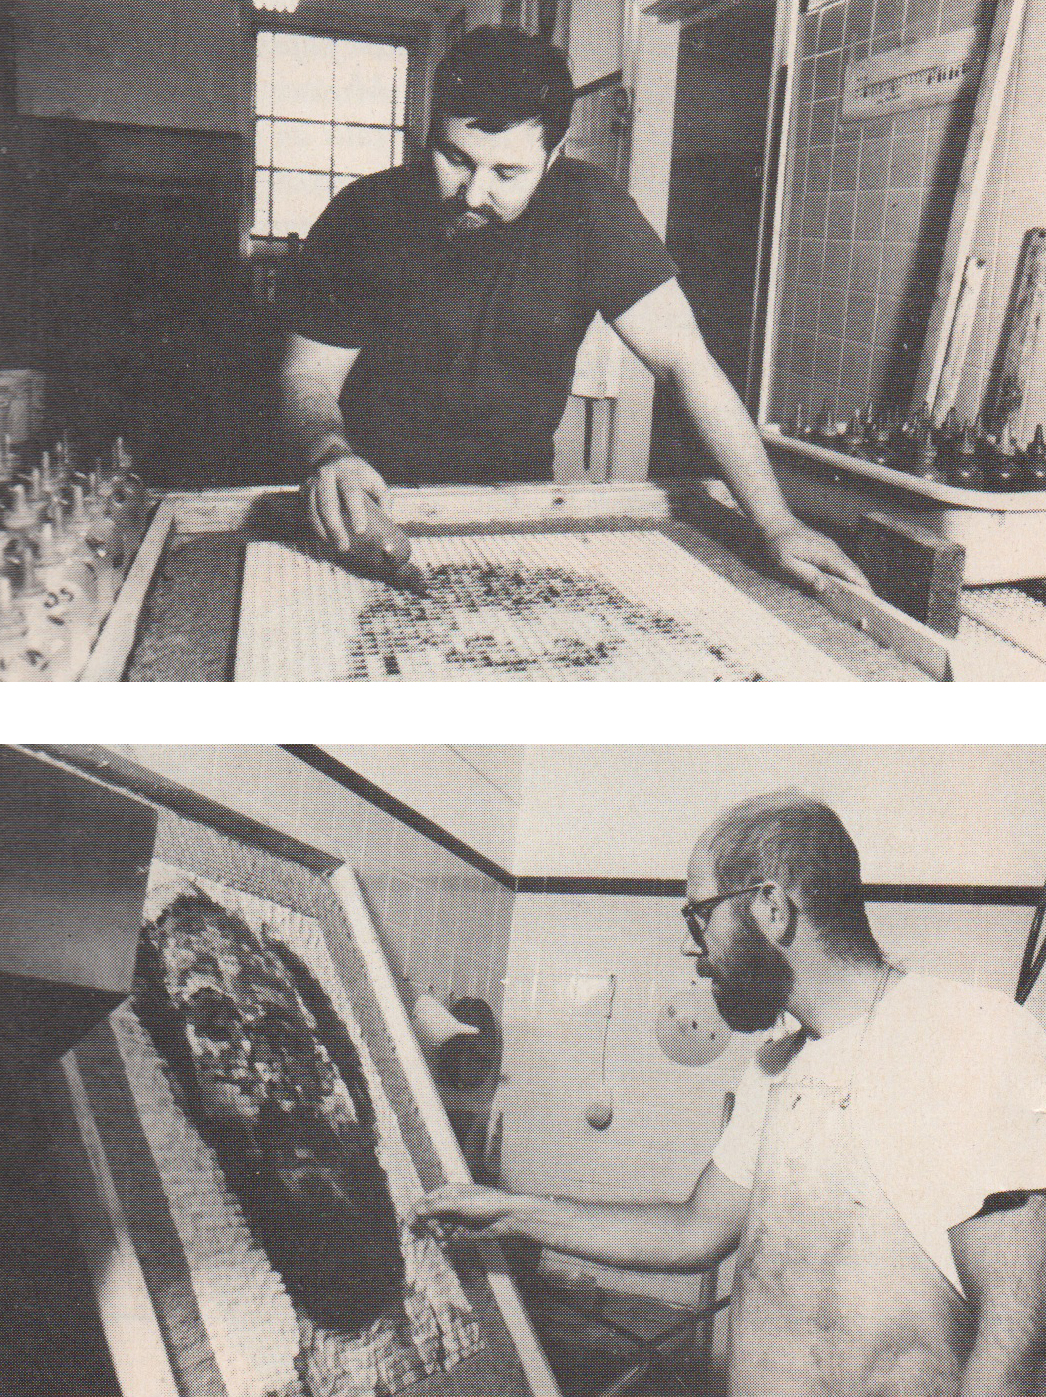 A familiar image takes a new form in a 1982 collaboration between (top) Joe Wilfer and (bottom) Chuck Close.  "I love the physicality of pushing the pulp," says Close.  It's like making a pizza."